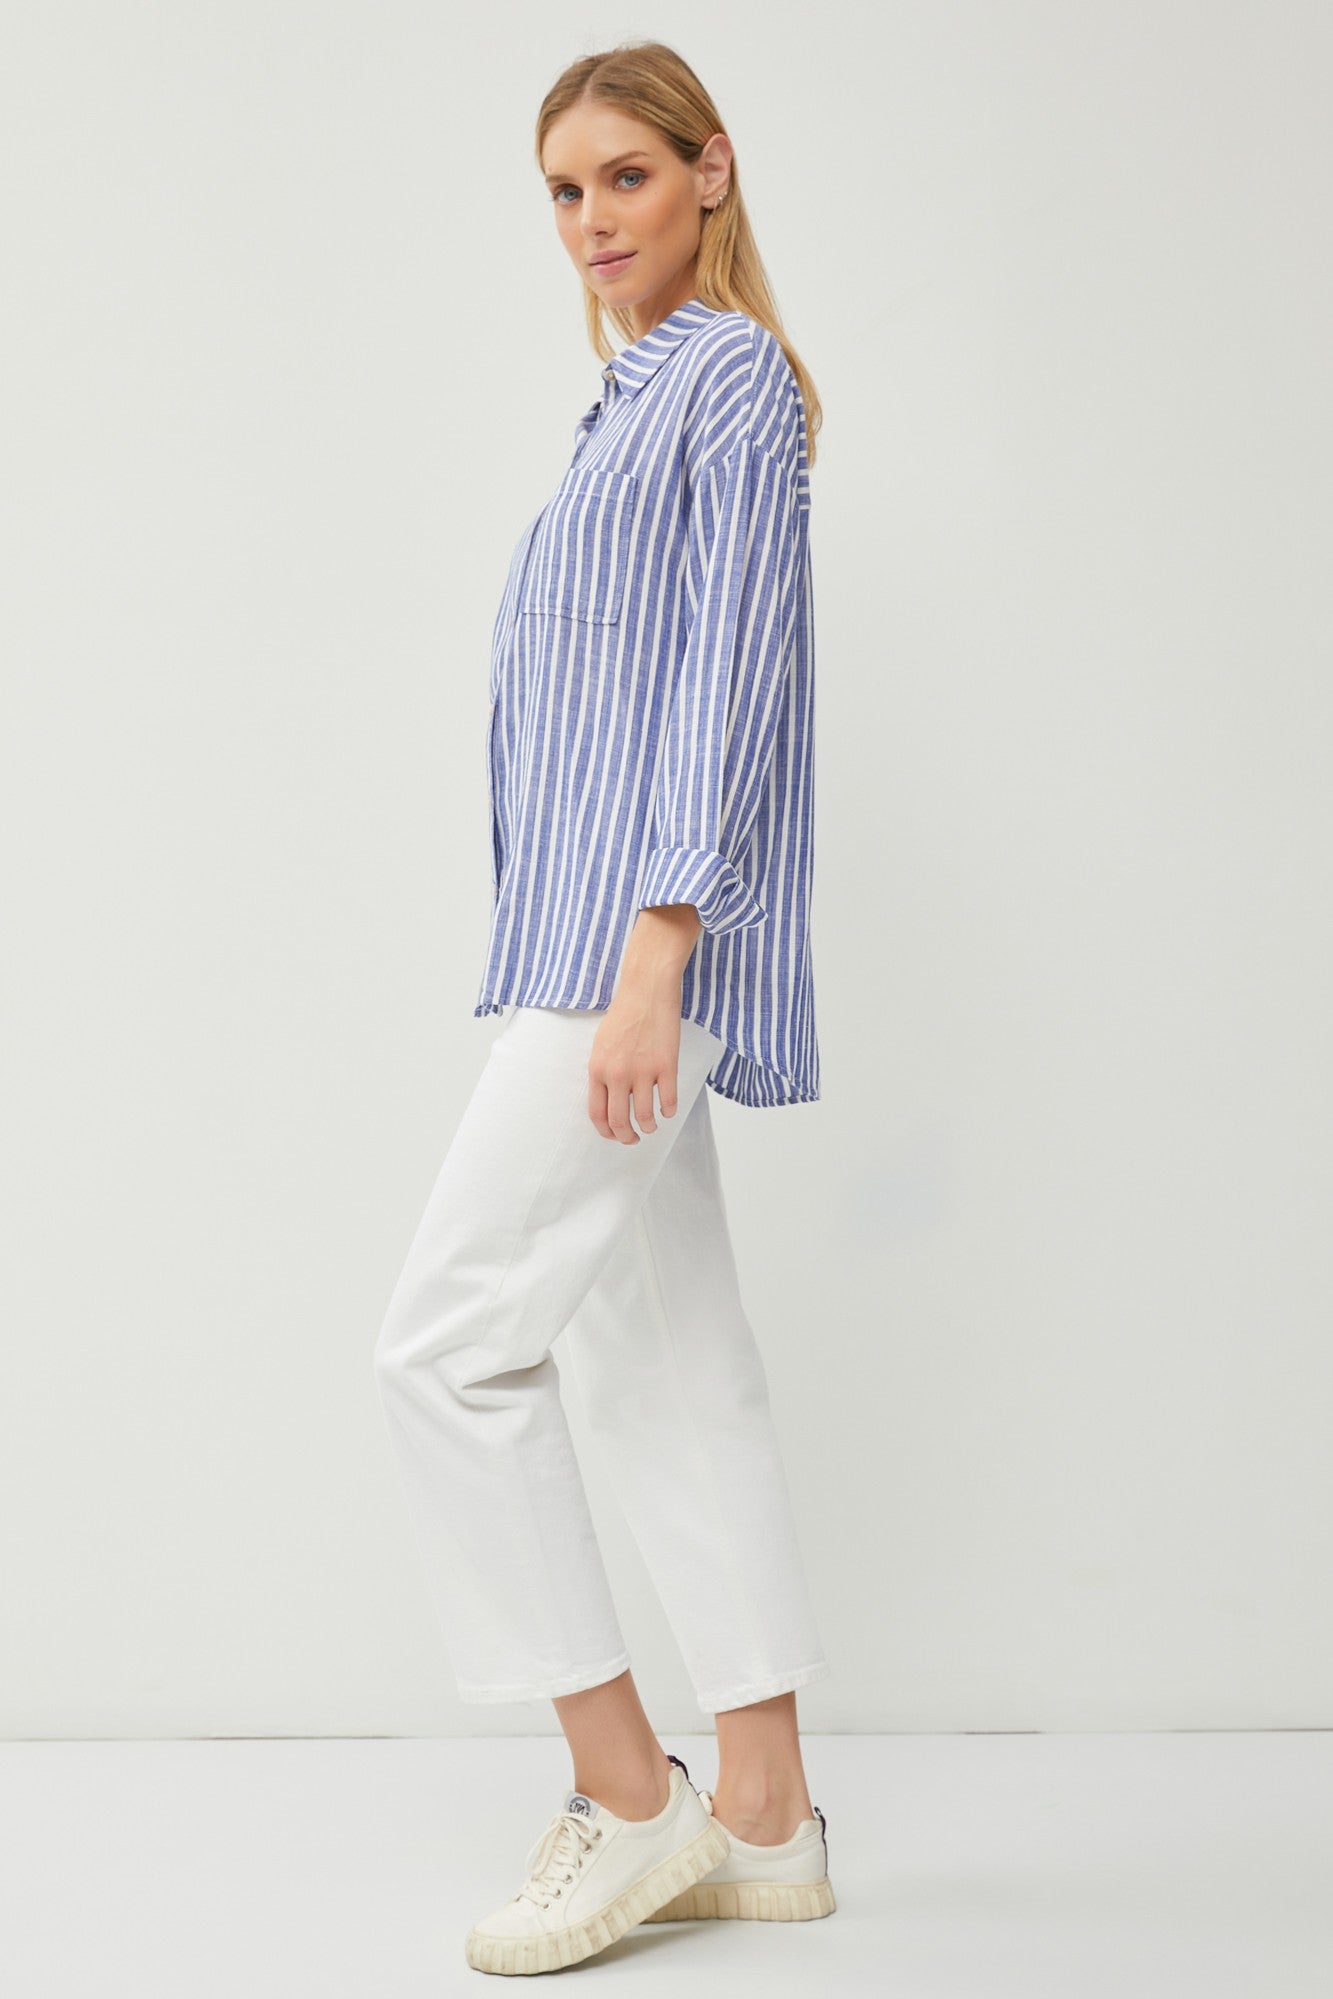 Oceans Away Striped Button Down